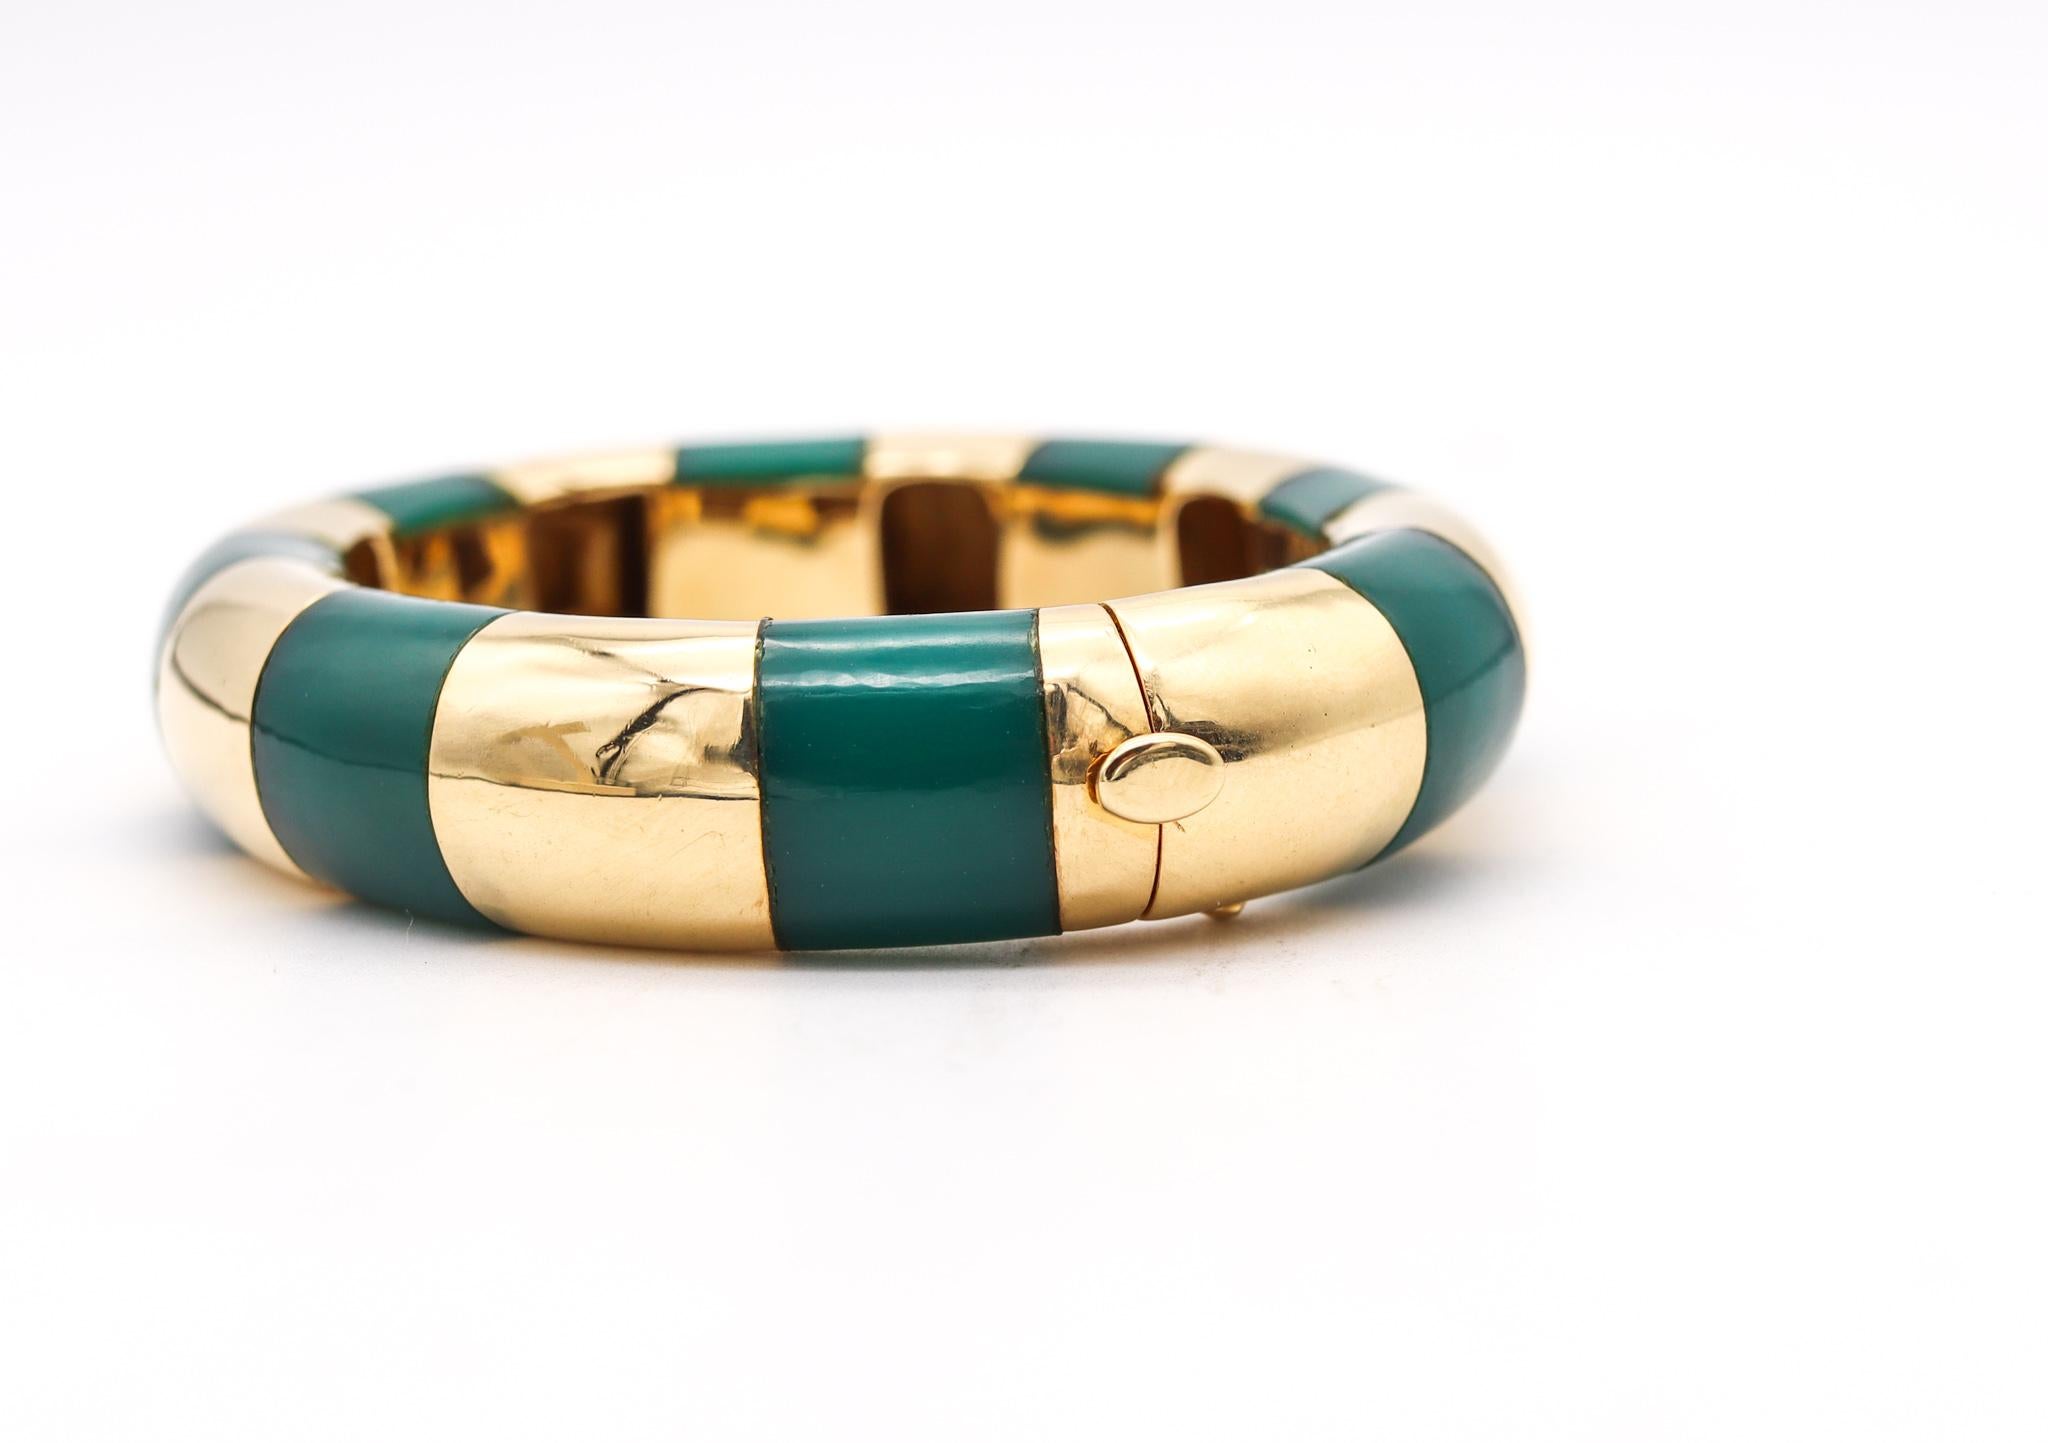 Cabochon Tiffany & Co 1973 Sonia Younis Bangle Bracelet 18kt Yellow Gold with Chrysoprase